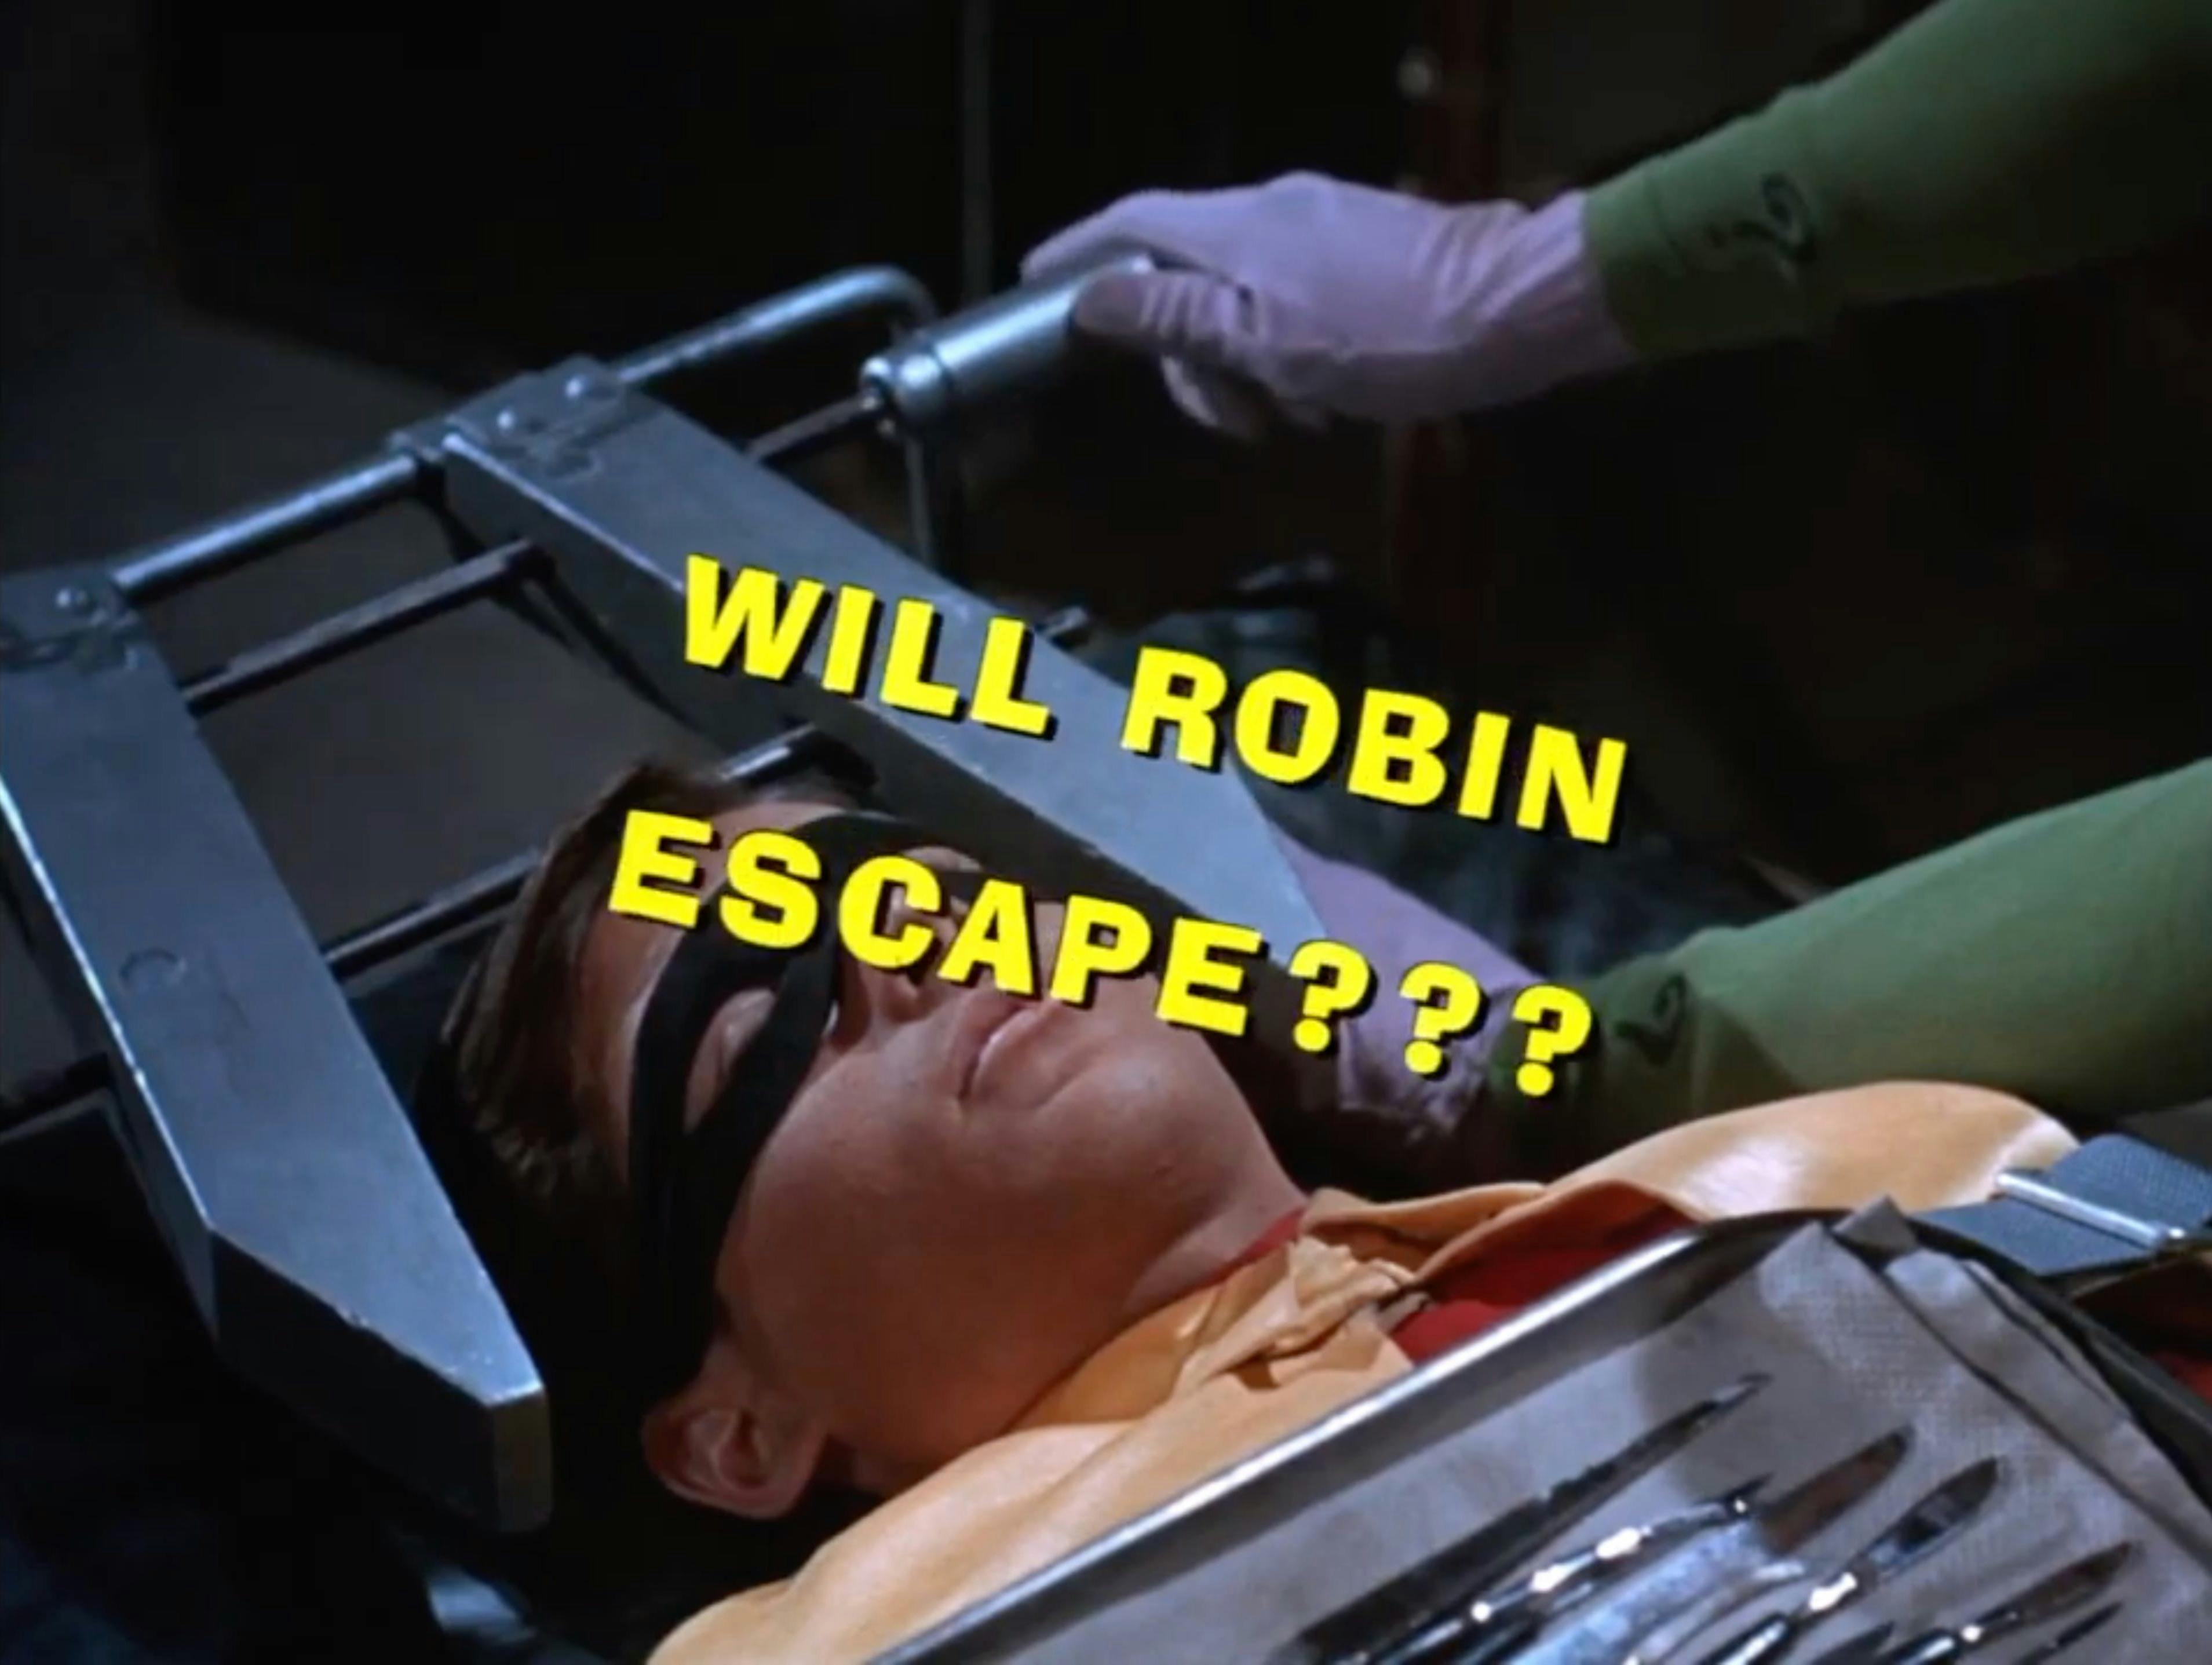 Robin trapped in some kind of torture device by the Riddler, with the words superimposed: "Will Robin escape???"